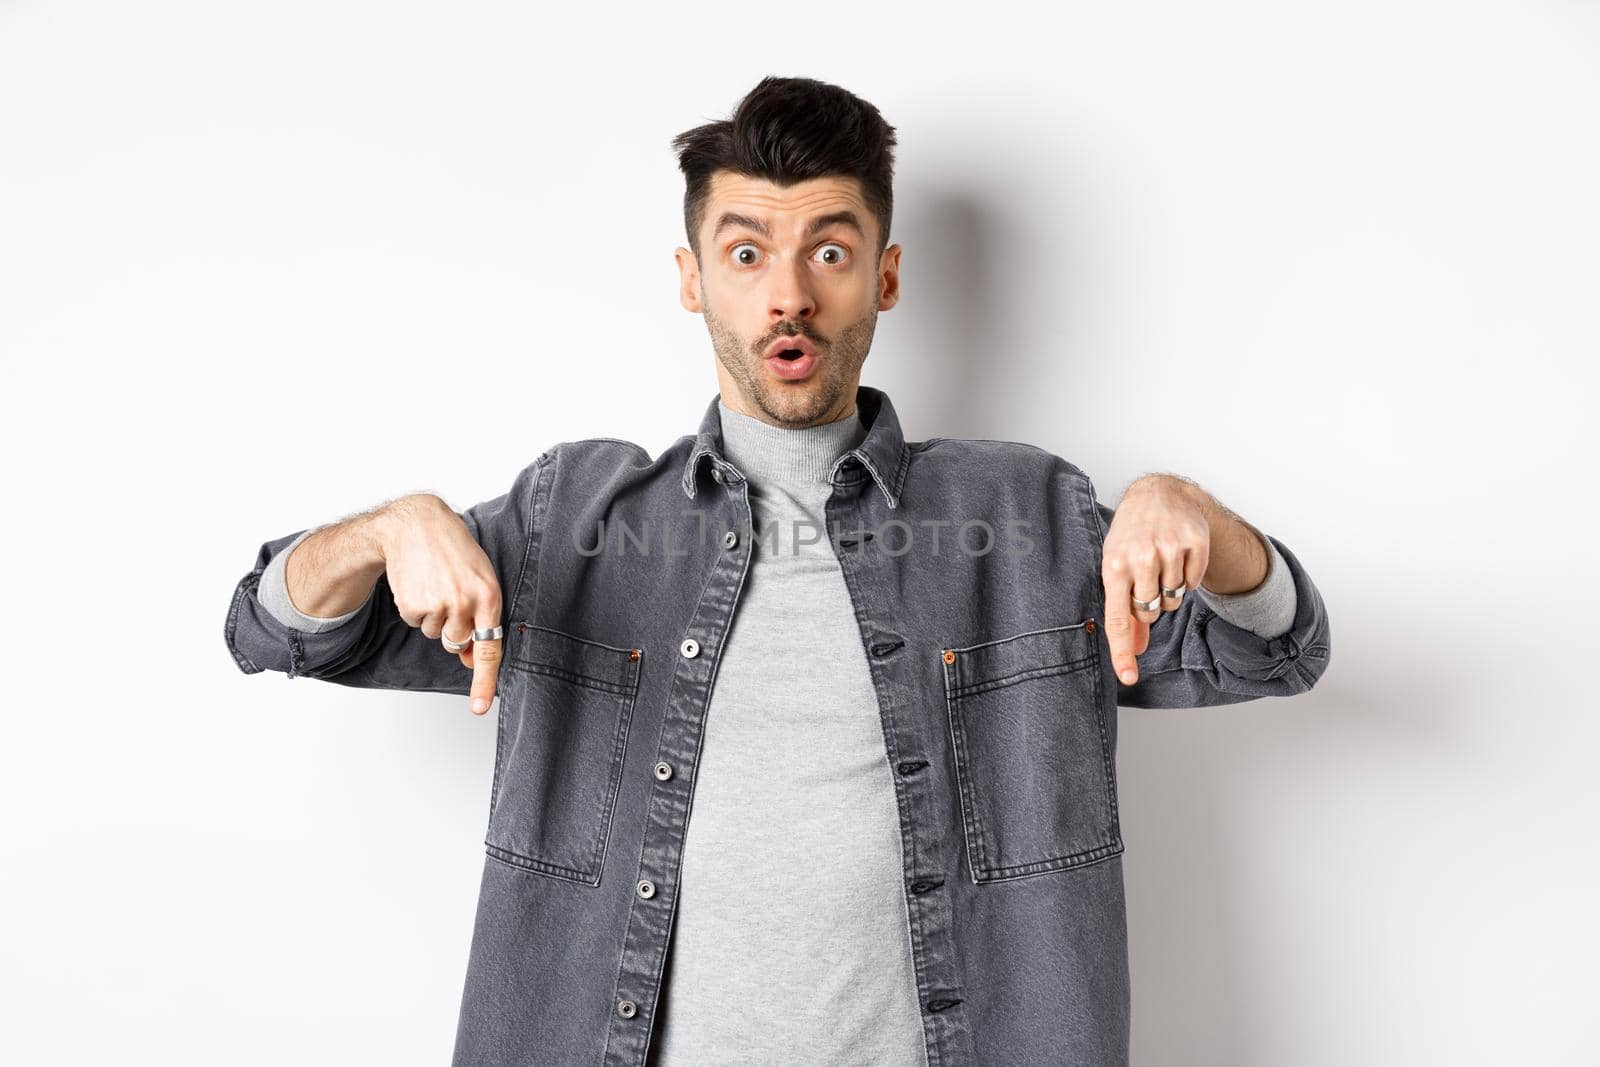 Excited guy say wow, pointing fingers down amazed, showing cool promo offer, standing on white background in denim jacket.